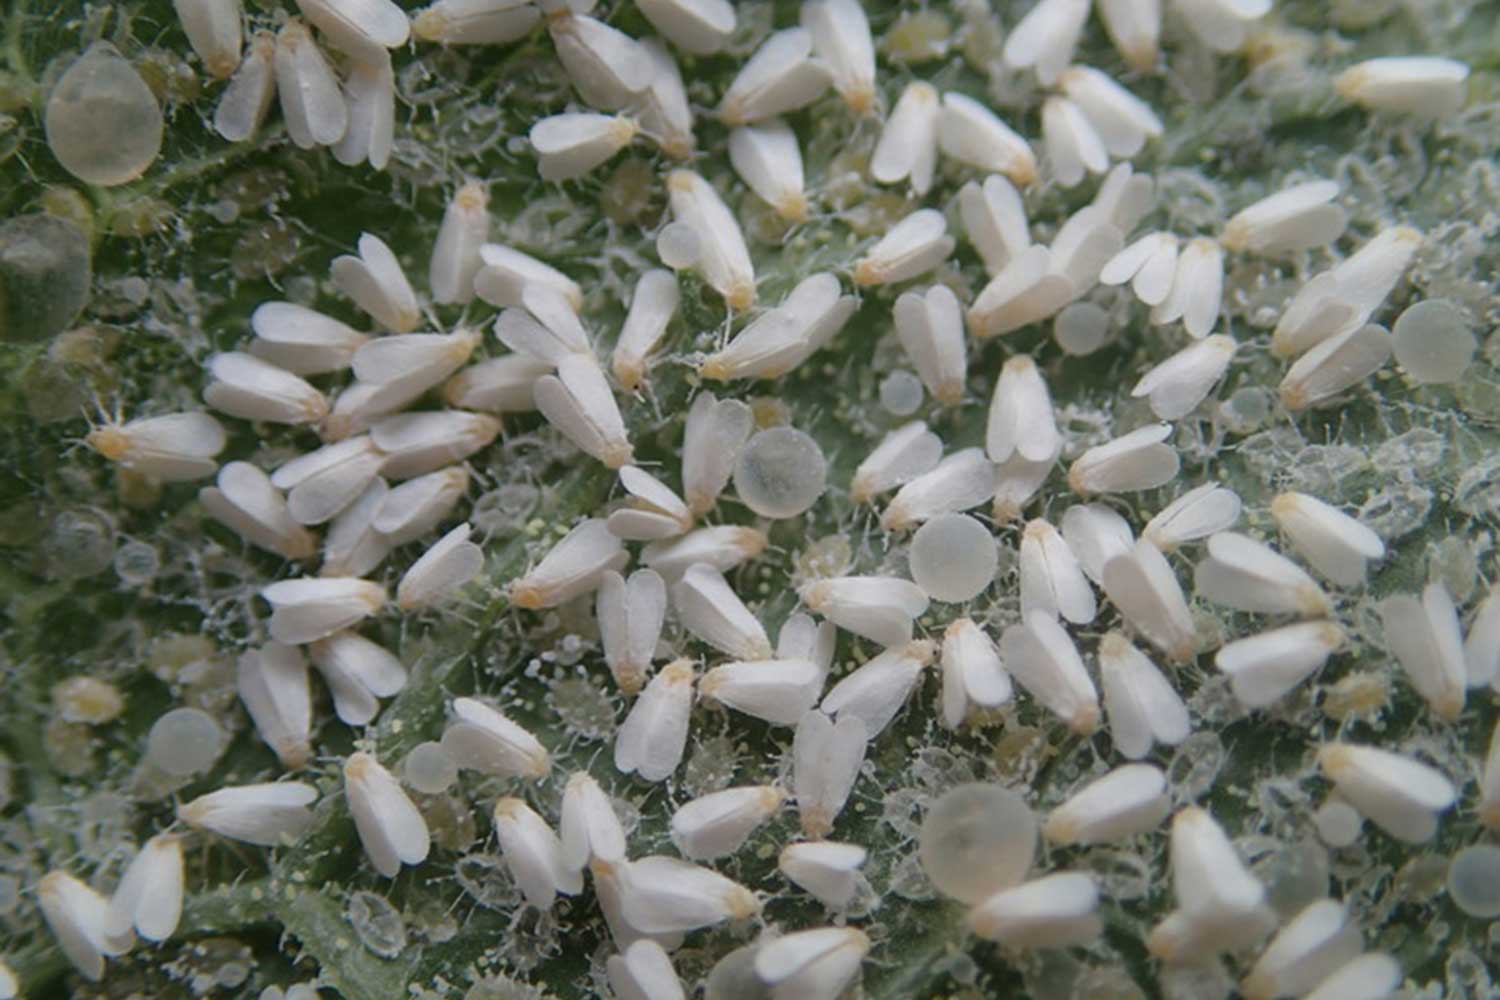 Small white insects with tent like wings present on a green leaf.